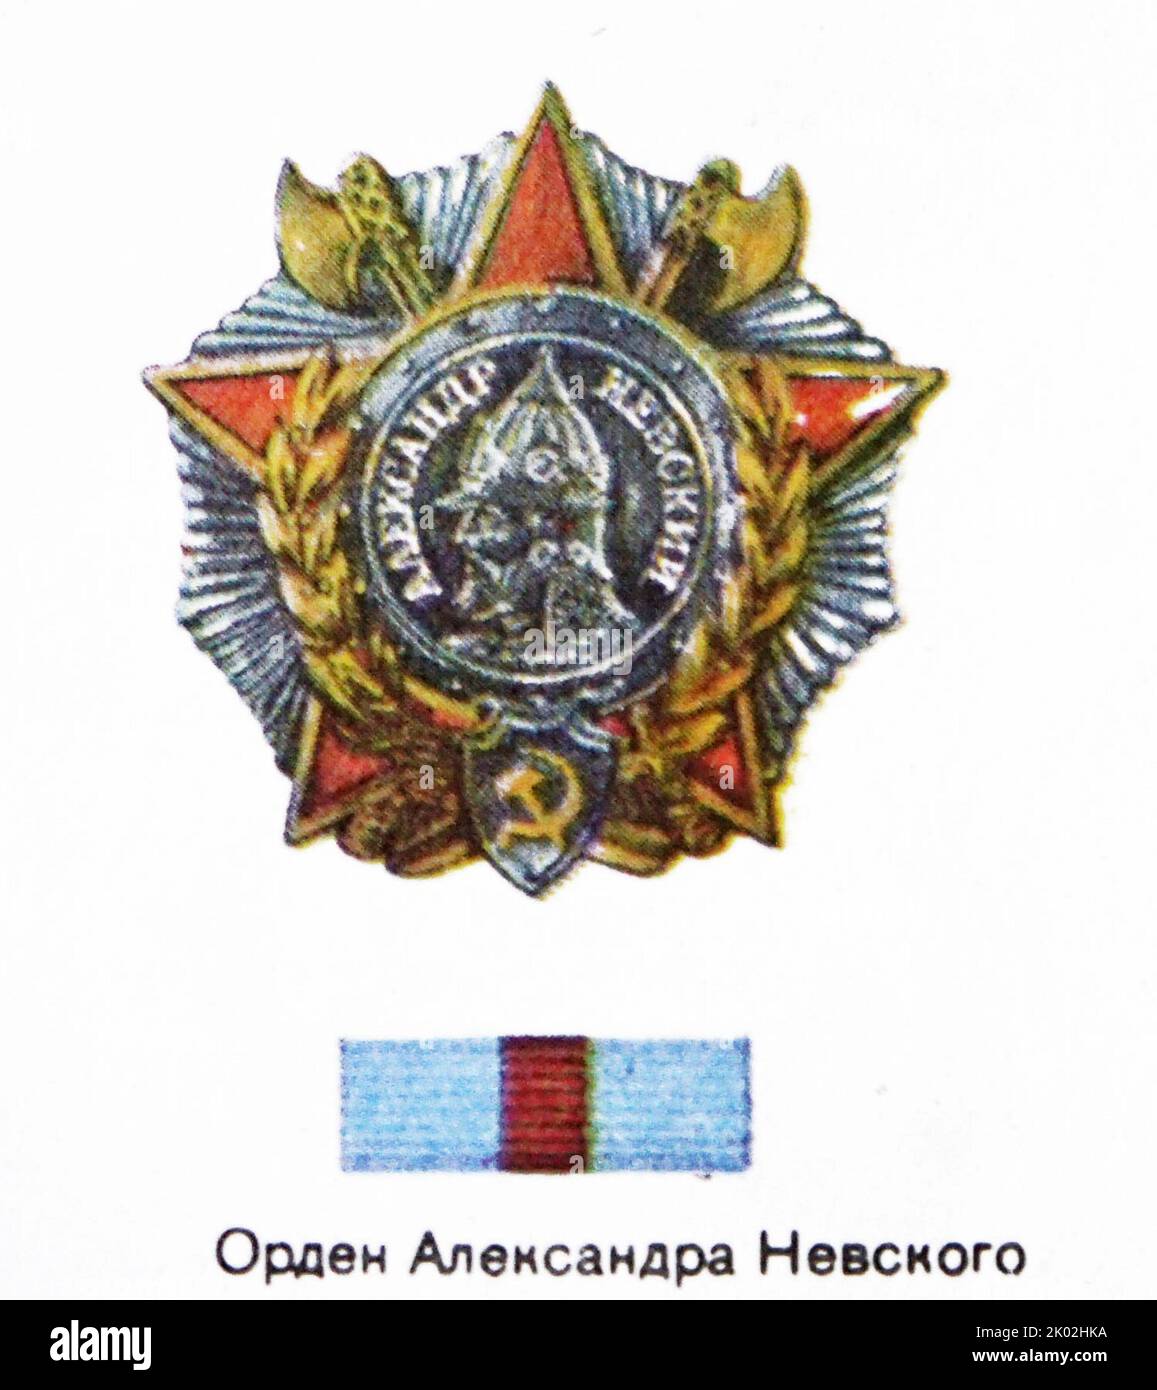 The Order of Alexander Nevsky, is an order of merit of the Russian Federation named in honour of saint Alexander Nevsky (1220-1263) and bestowed to civil servants for twenty years or more of highly meritorious service. It was originally established by the Soviet Union as a military honour during World War II Stock Photo